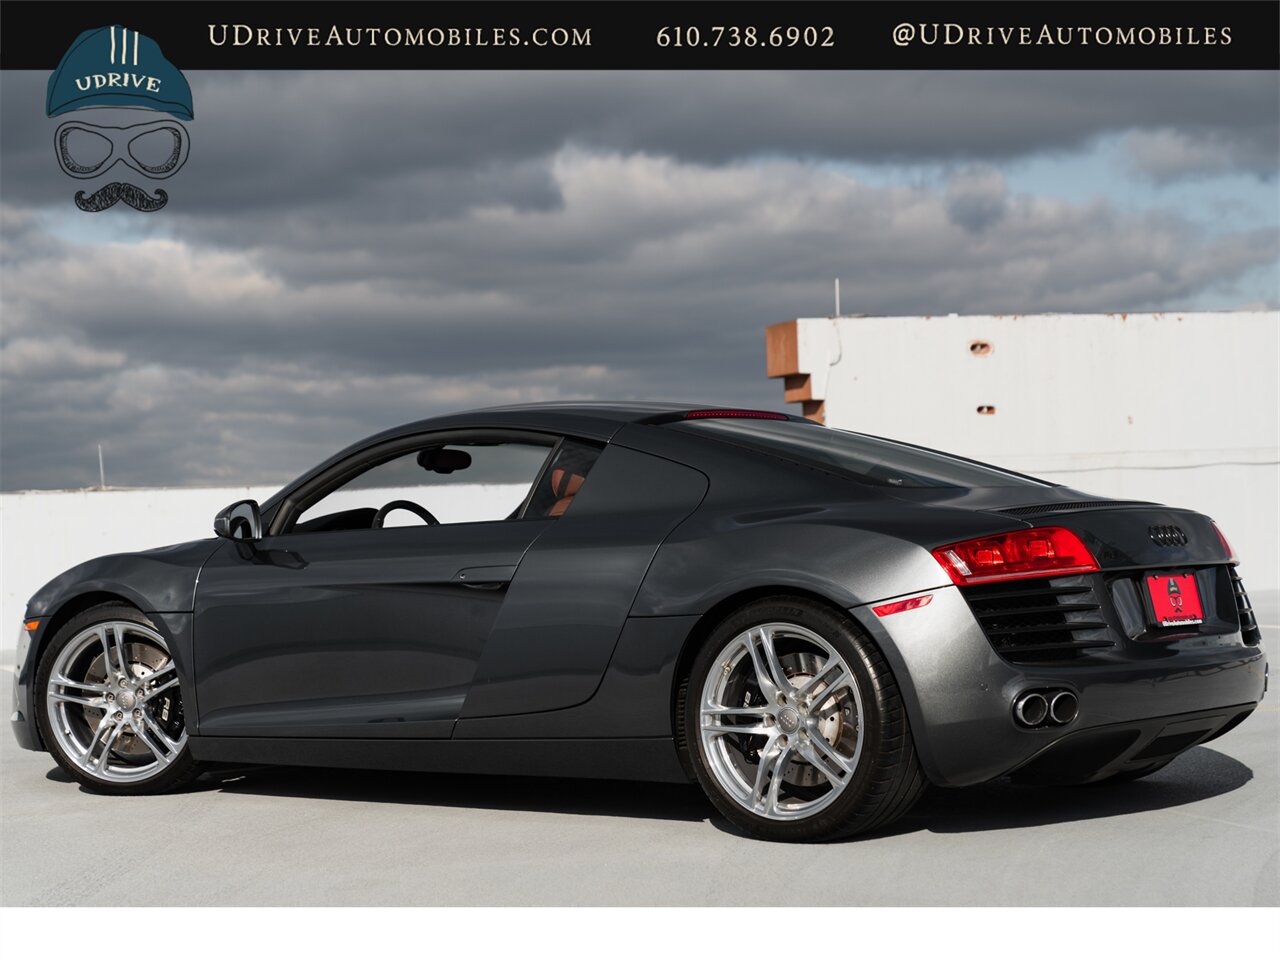 2009 Audi R8 Quattro  4.2 V8 6 Speed Manual 15k Miles - Photo 3 - West Chester, PA 19382